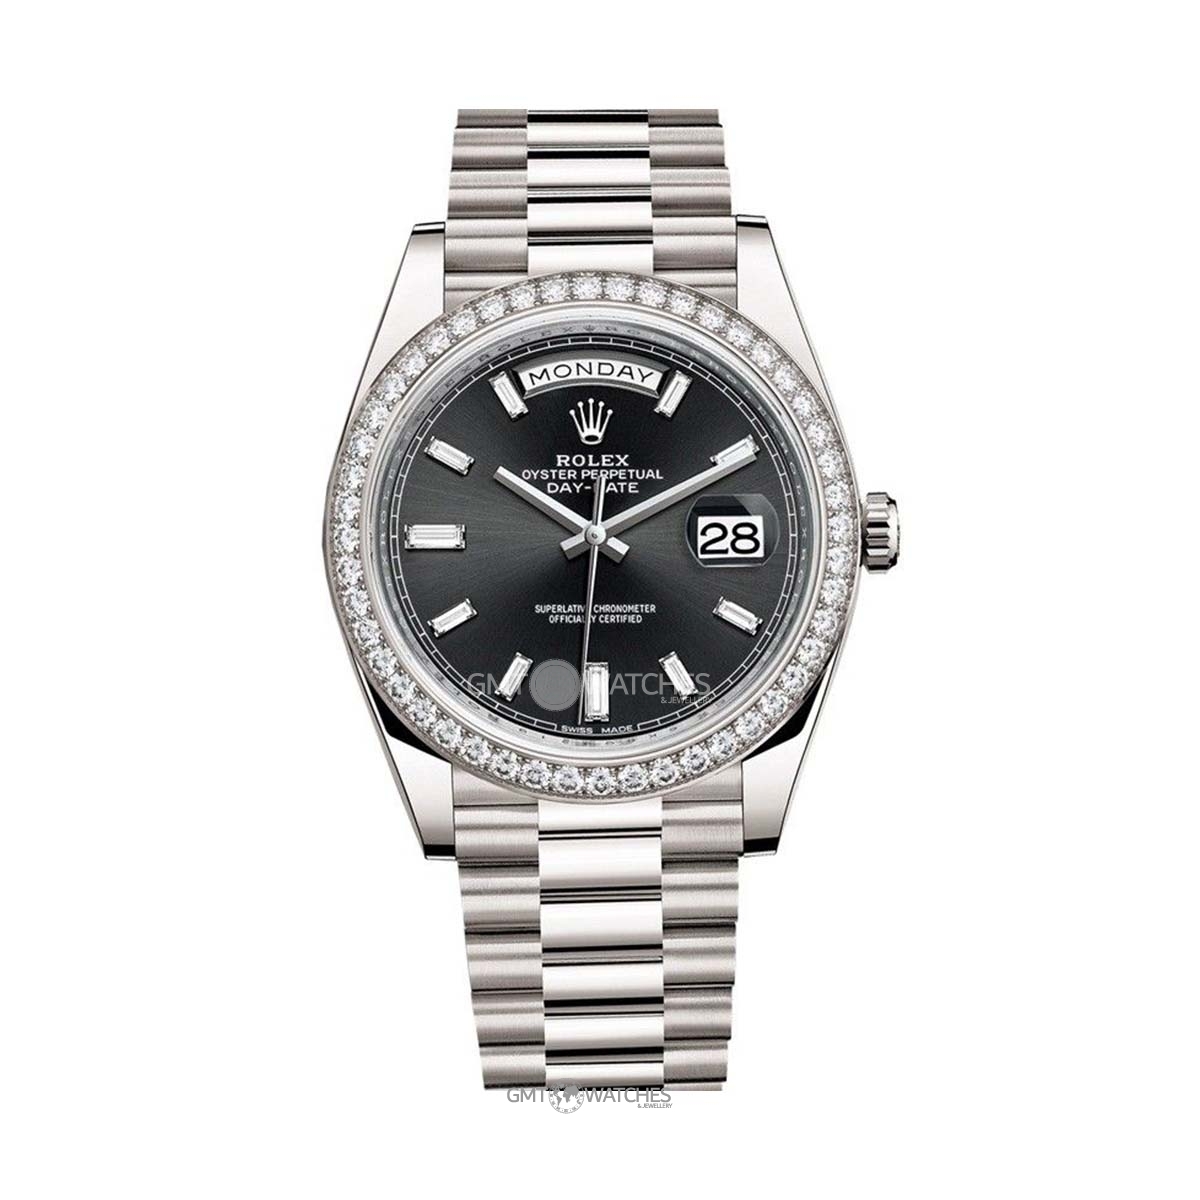 Rolex Oyster Perpetual Day-Date 40mm 18k White Gold 228349RBR bkbdp